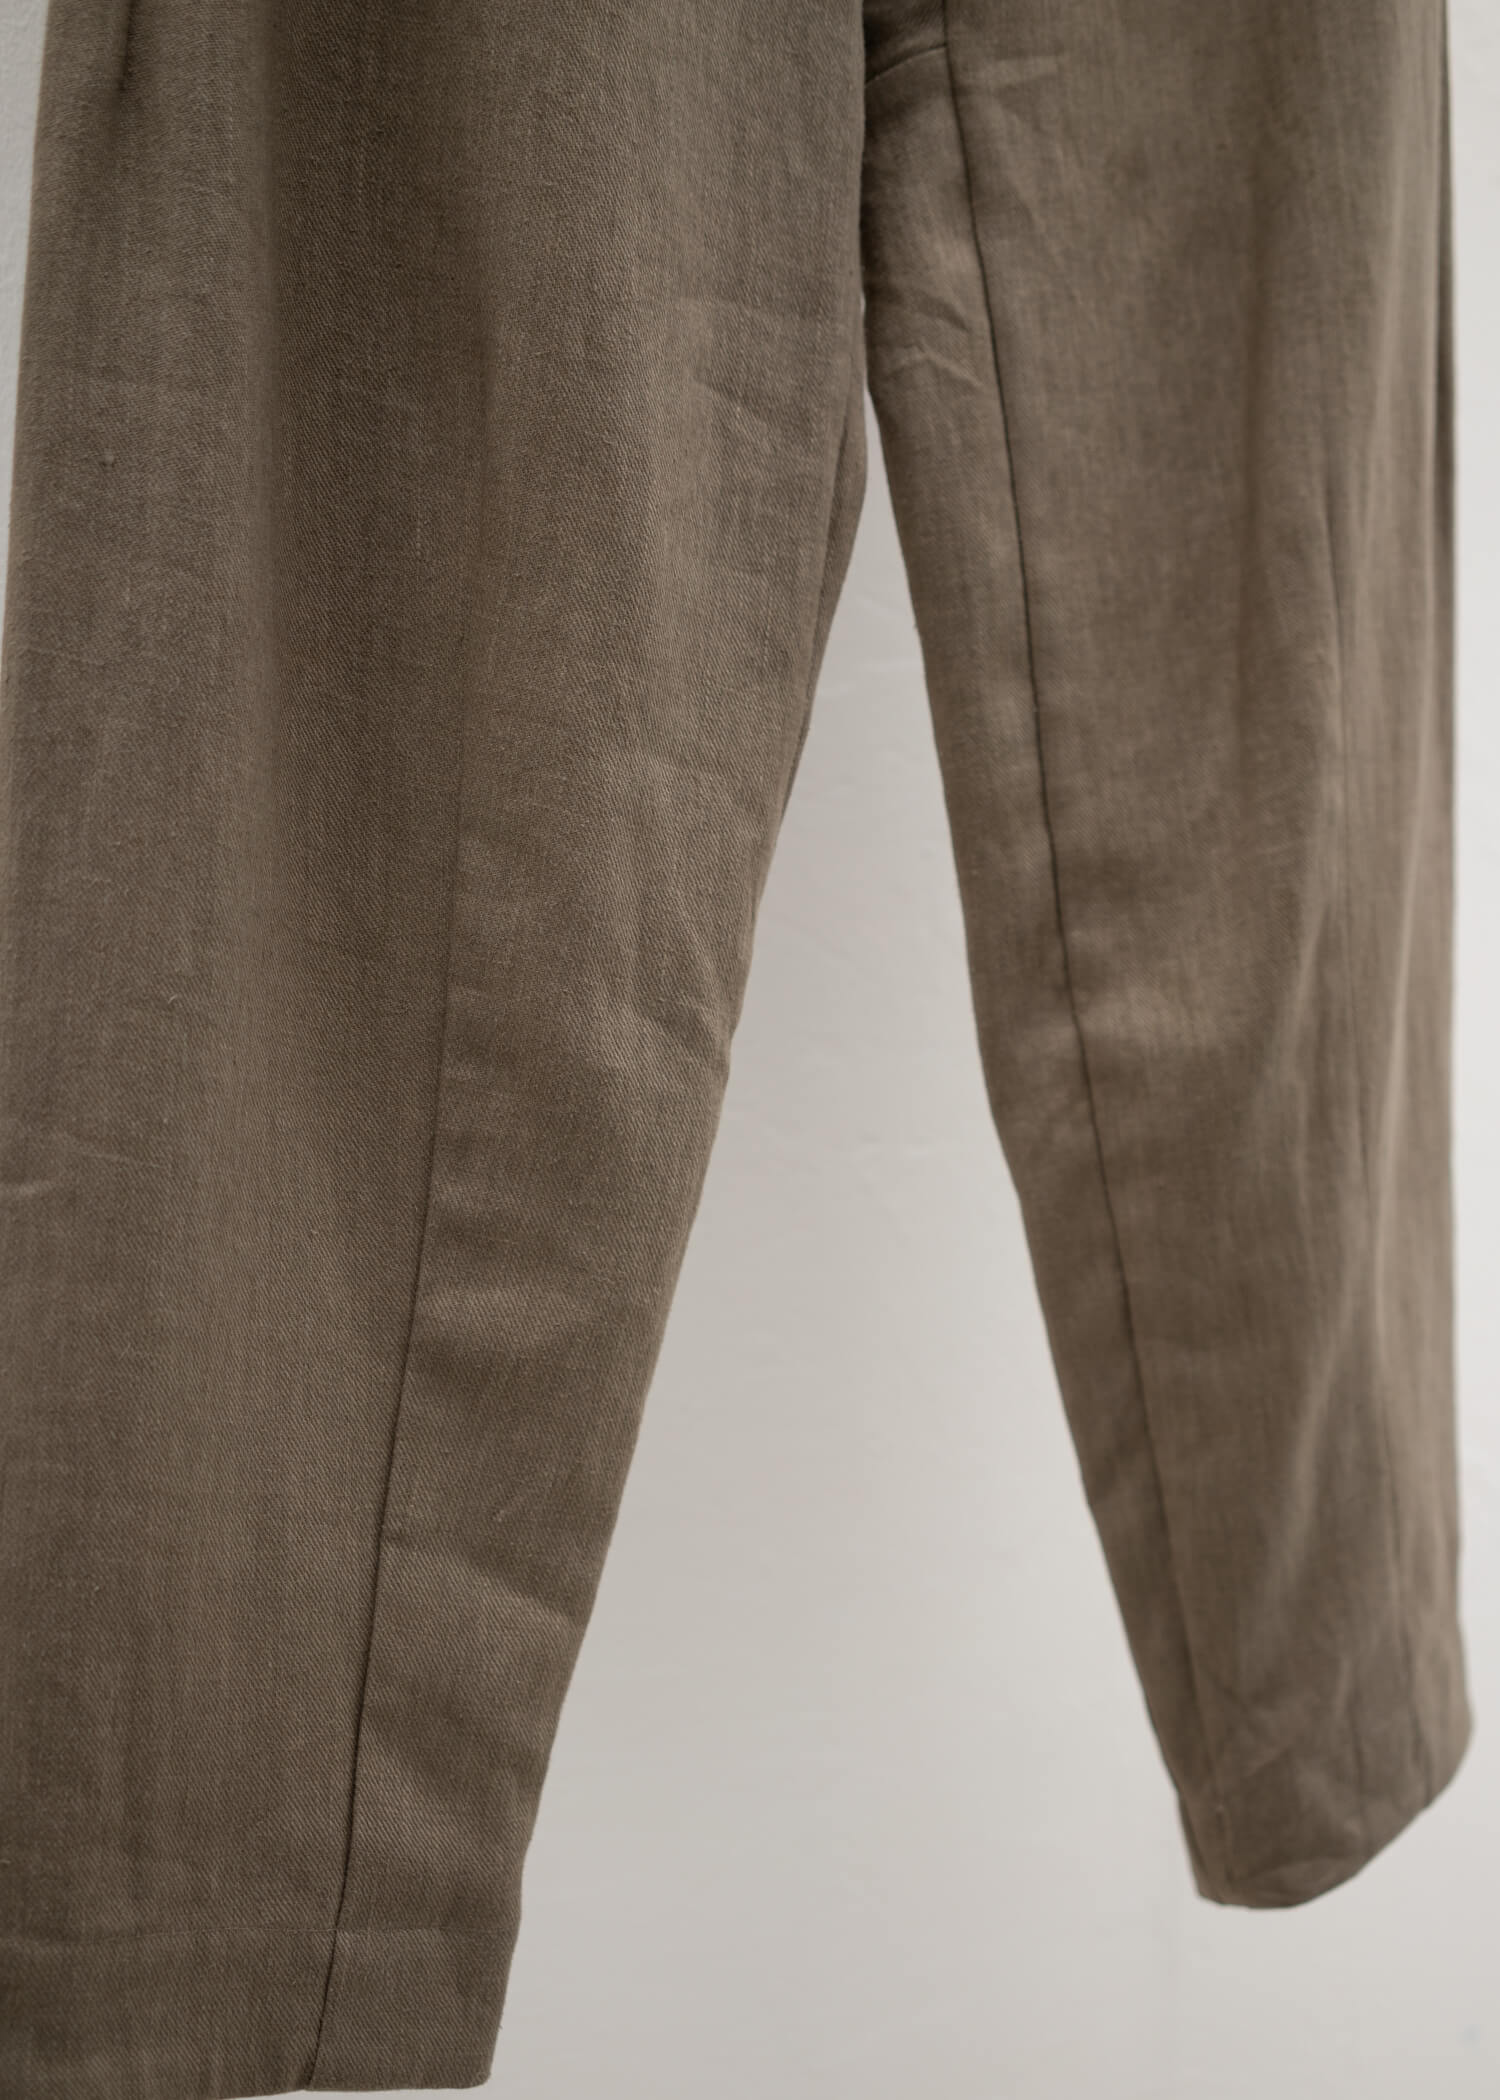 JAN-JAN VAN ESSCHE "TROUTHERS#72" CHINO STYLETROUSERS